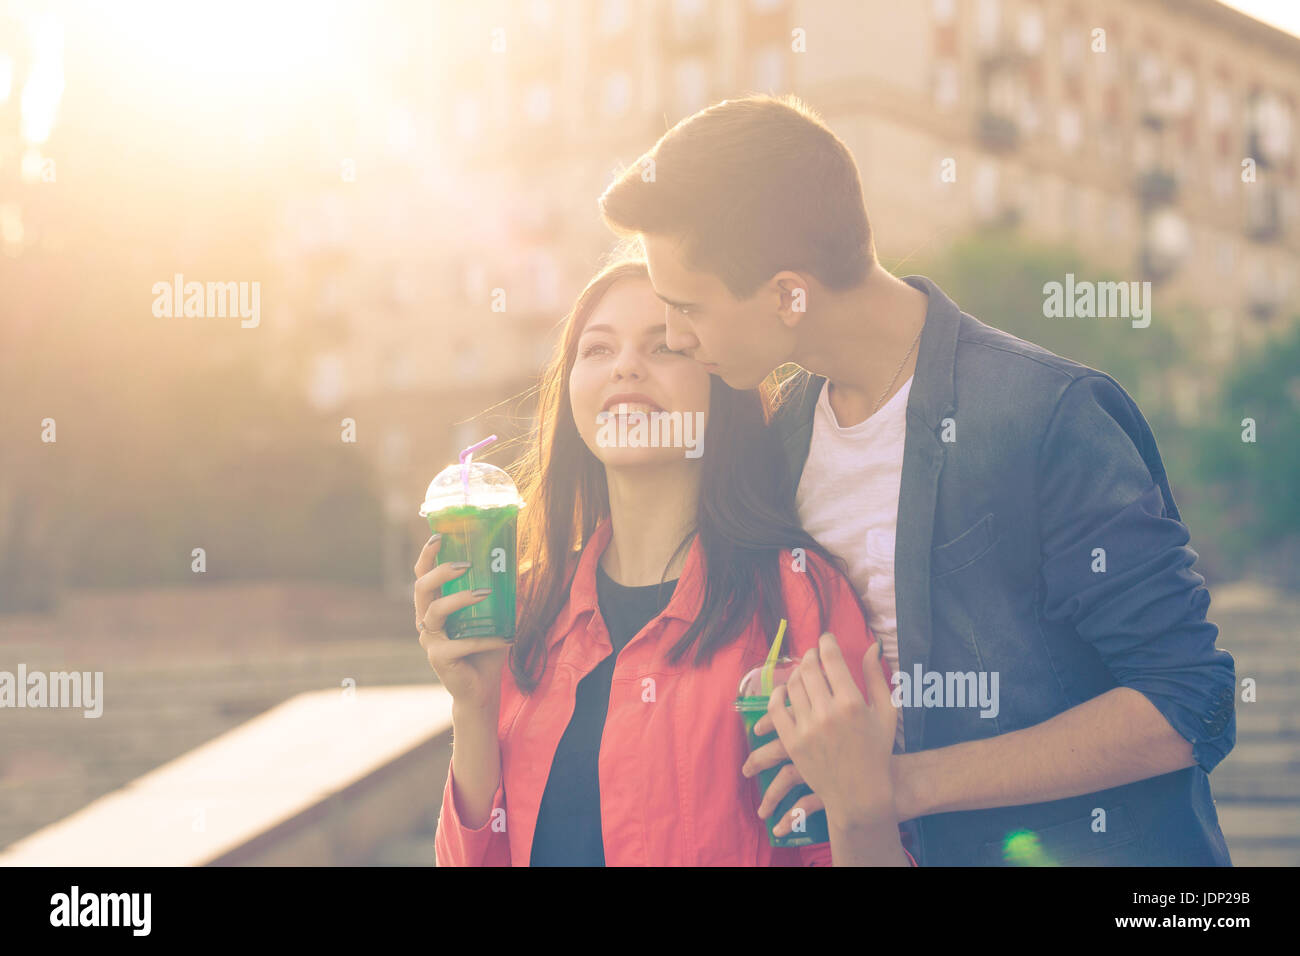 Teenagers drink fruit fresh from glasses. He hugs and kisses her. Couple in love. Romance of first love. Stock Photo